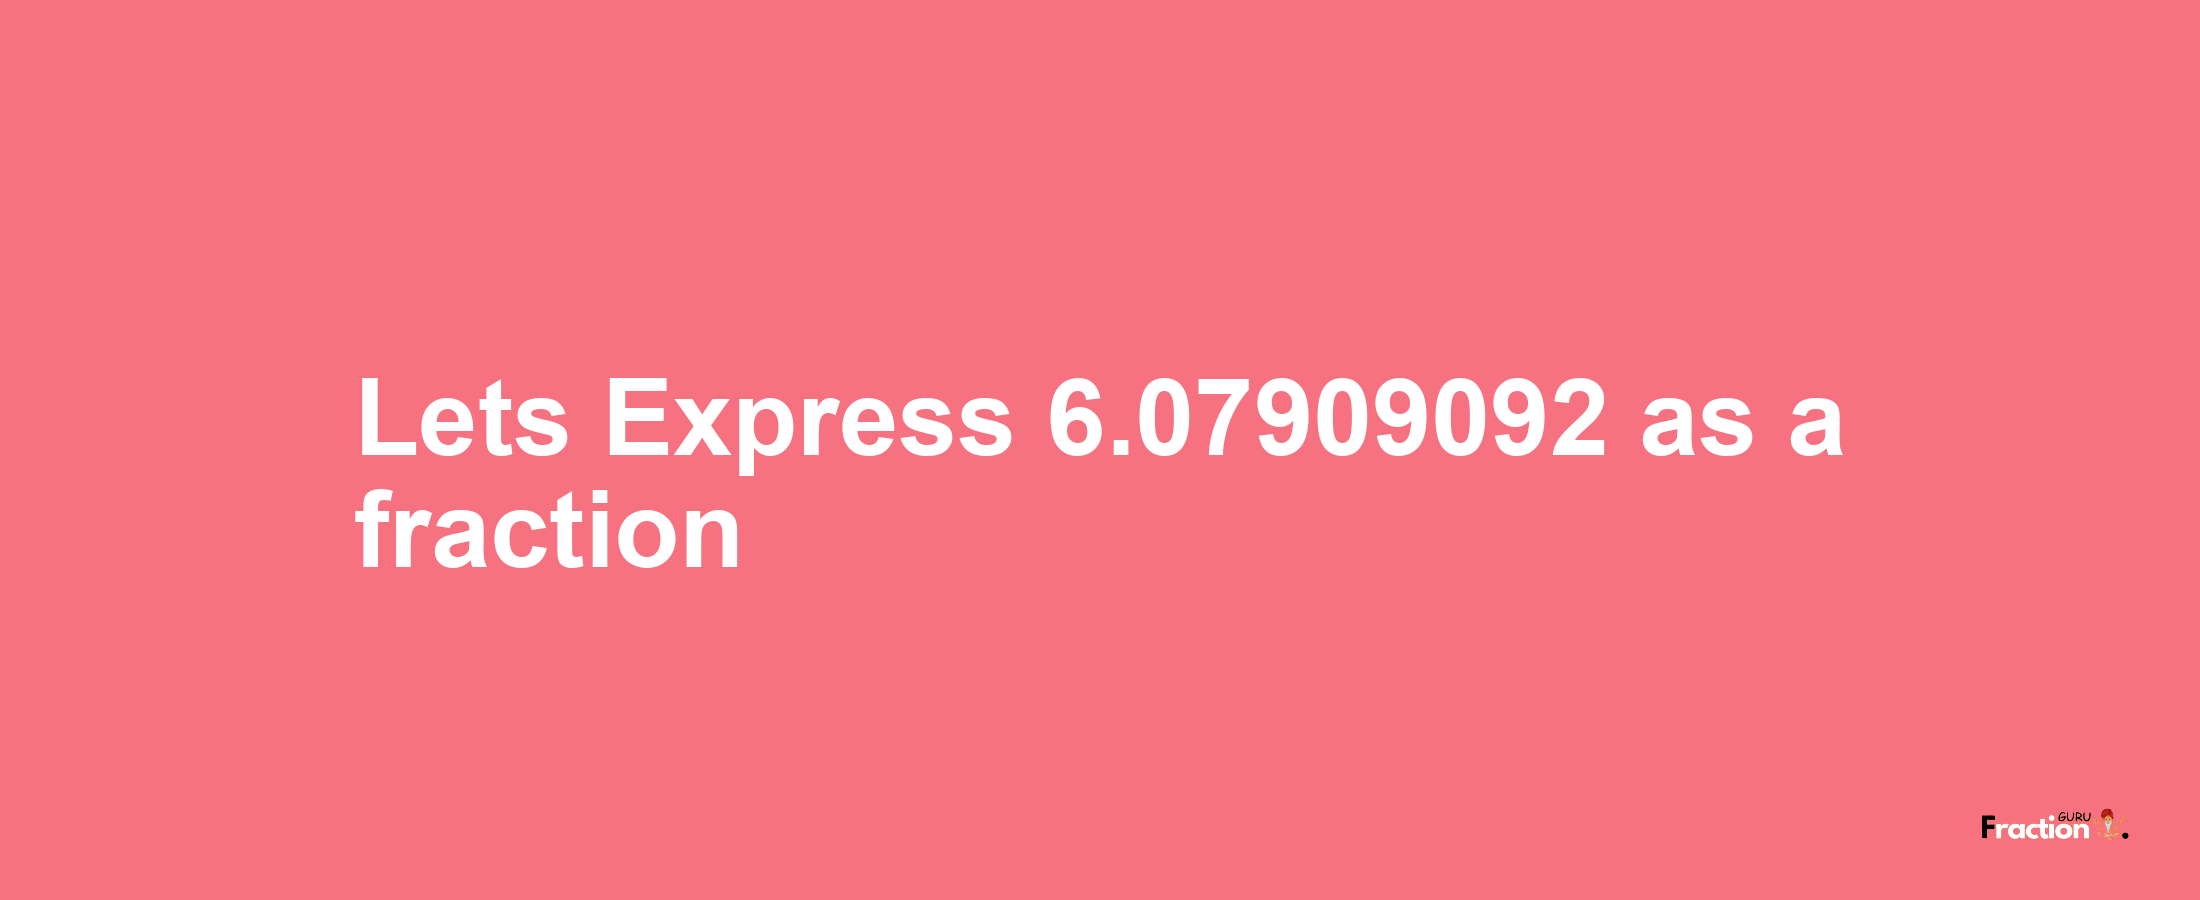 Lets Express 6.07909092 as afraction